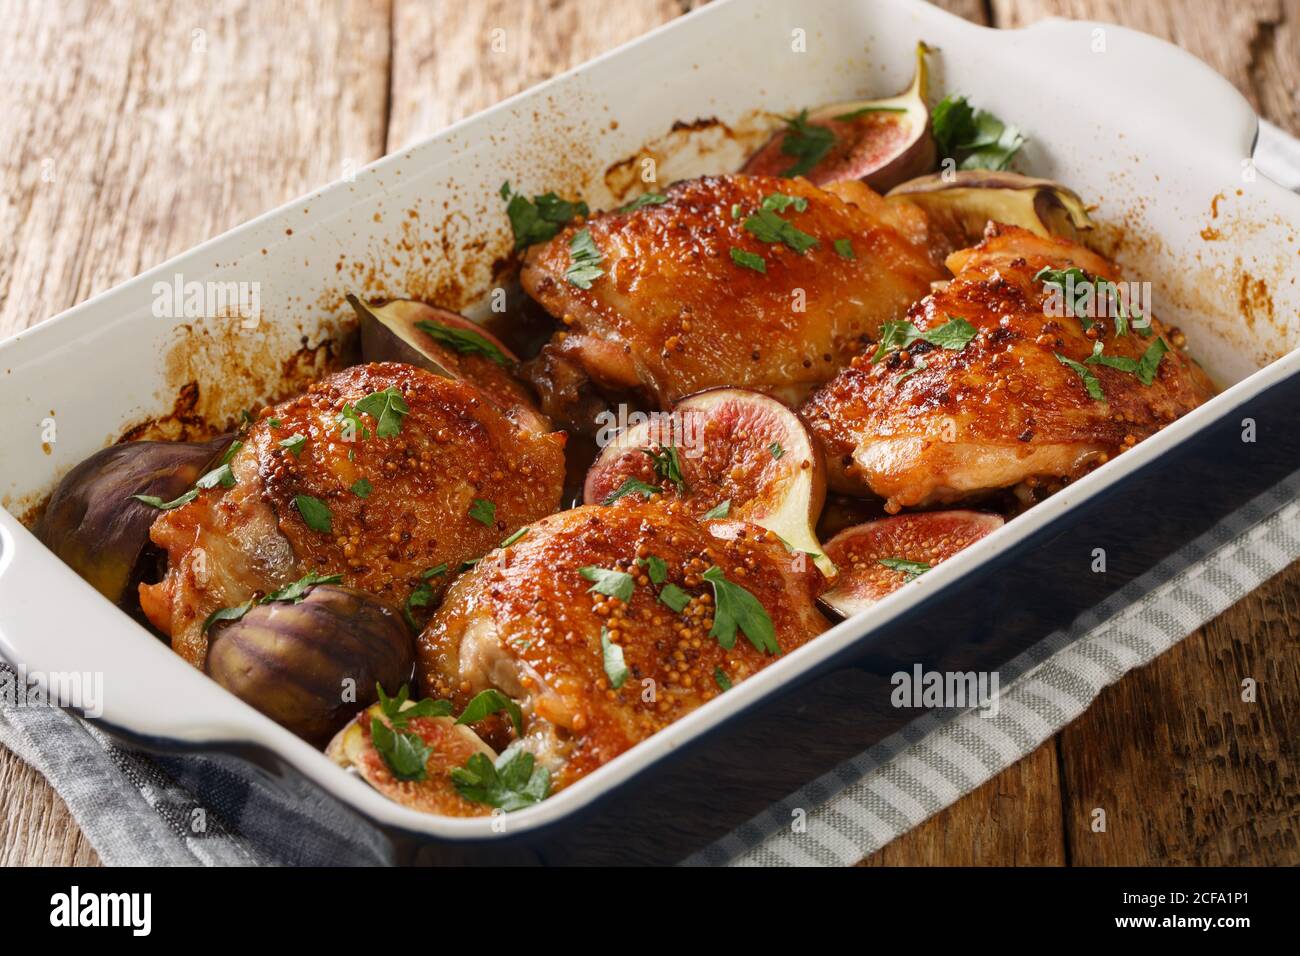 Honey Chicken Thighs Baked With Ripe Figs Mustard And Herbs Close Up In A Baking Dish On The Table Horizontal Stock Photo Alamy